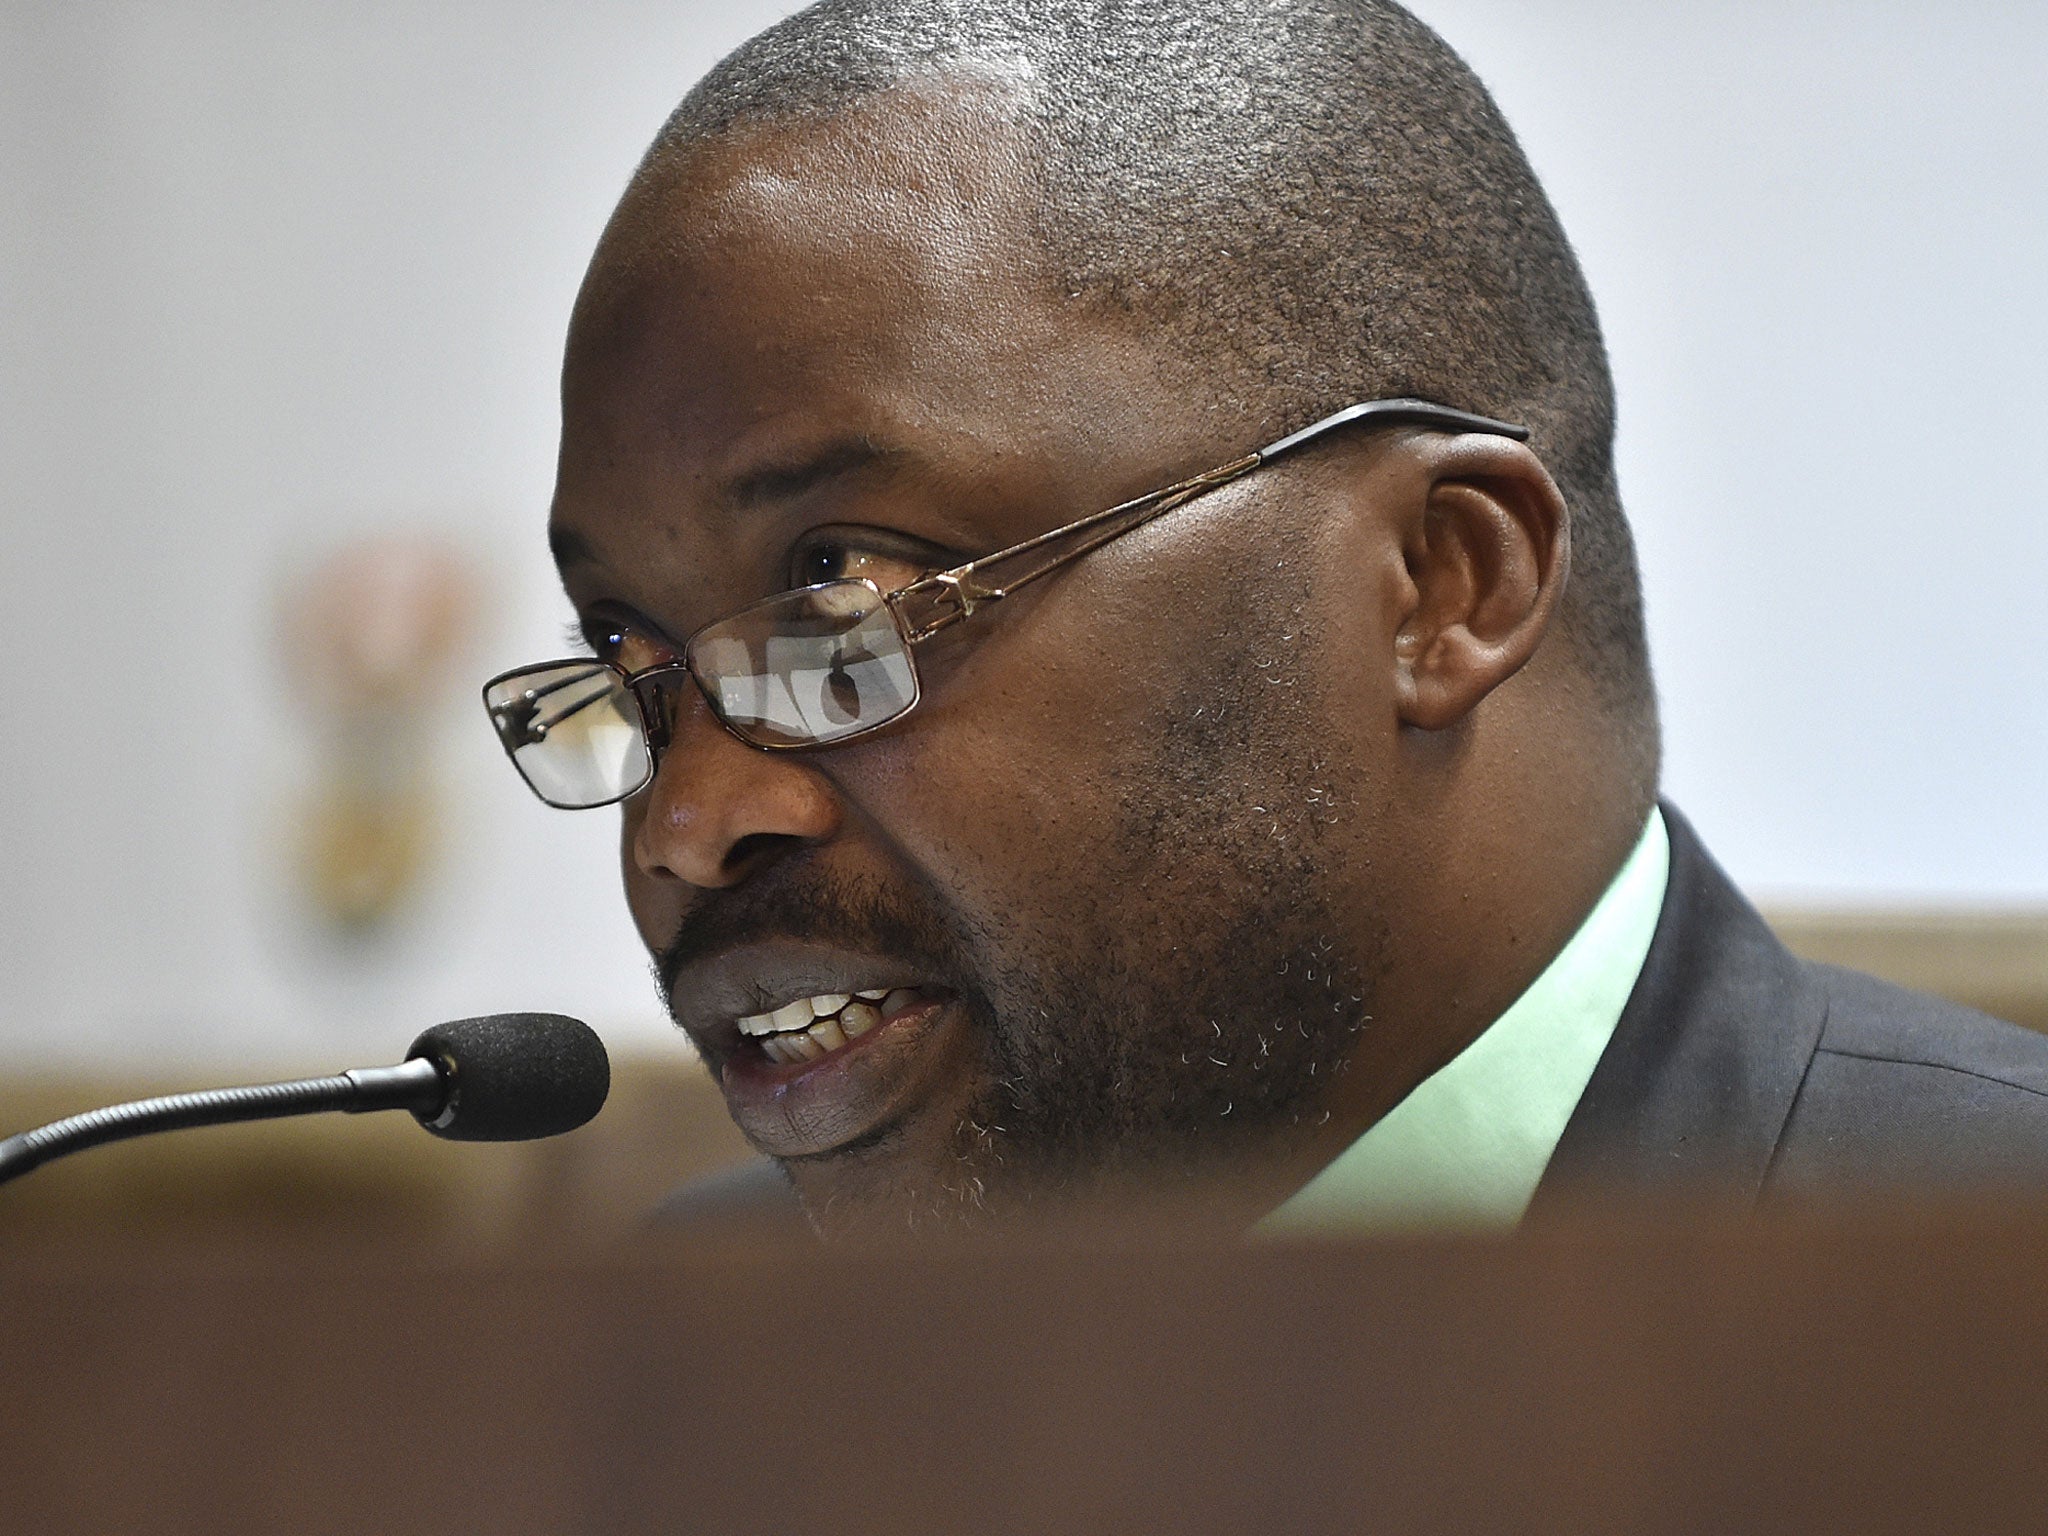 Justice Minister Michael Masutha said that the government would draft a bill to repeal South Africa's adoption of the ICC's Rome Statute